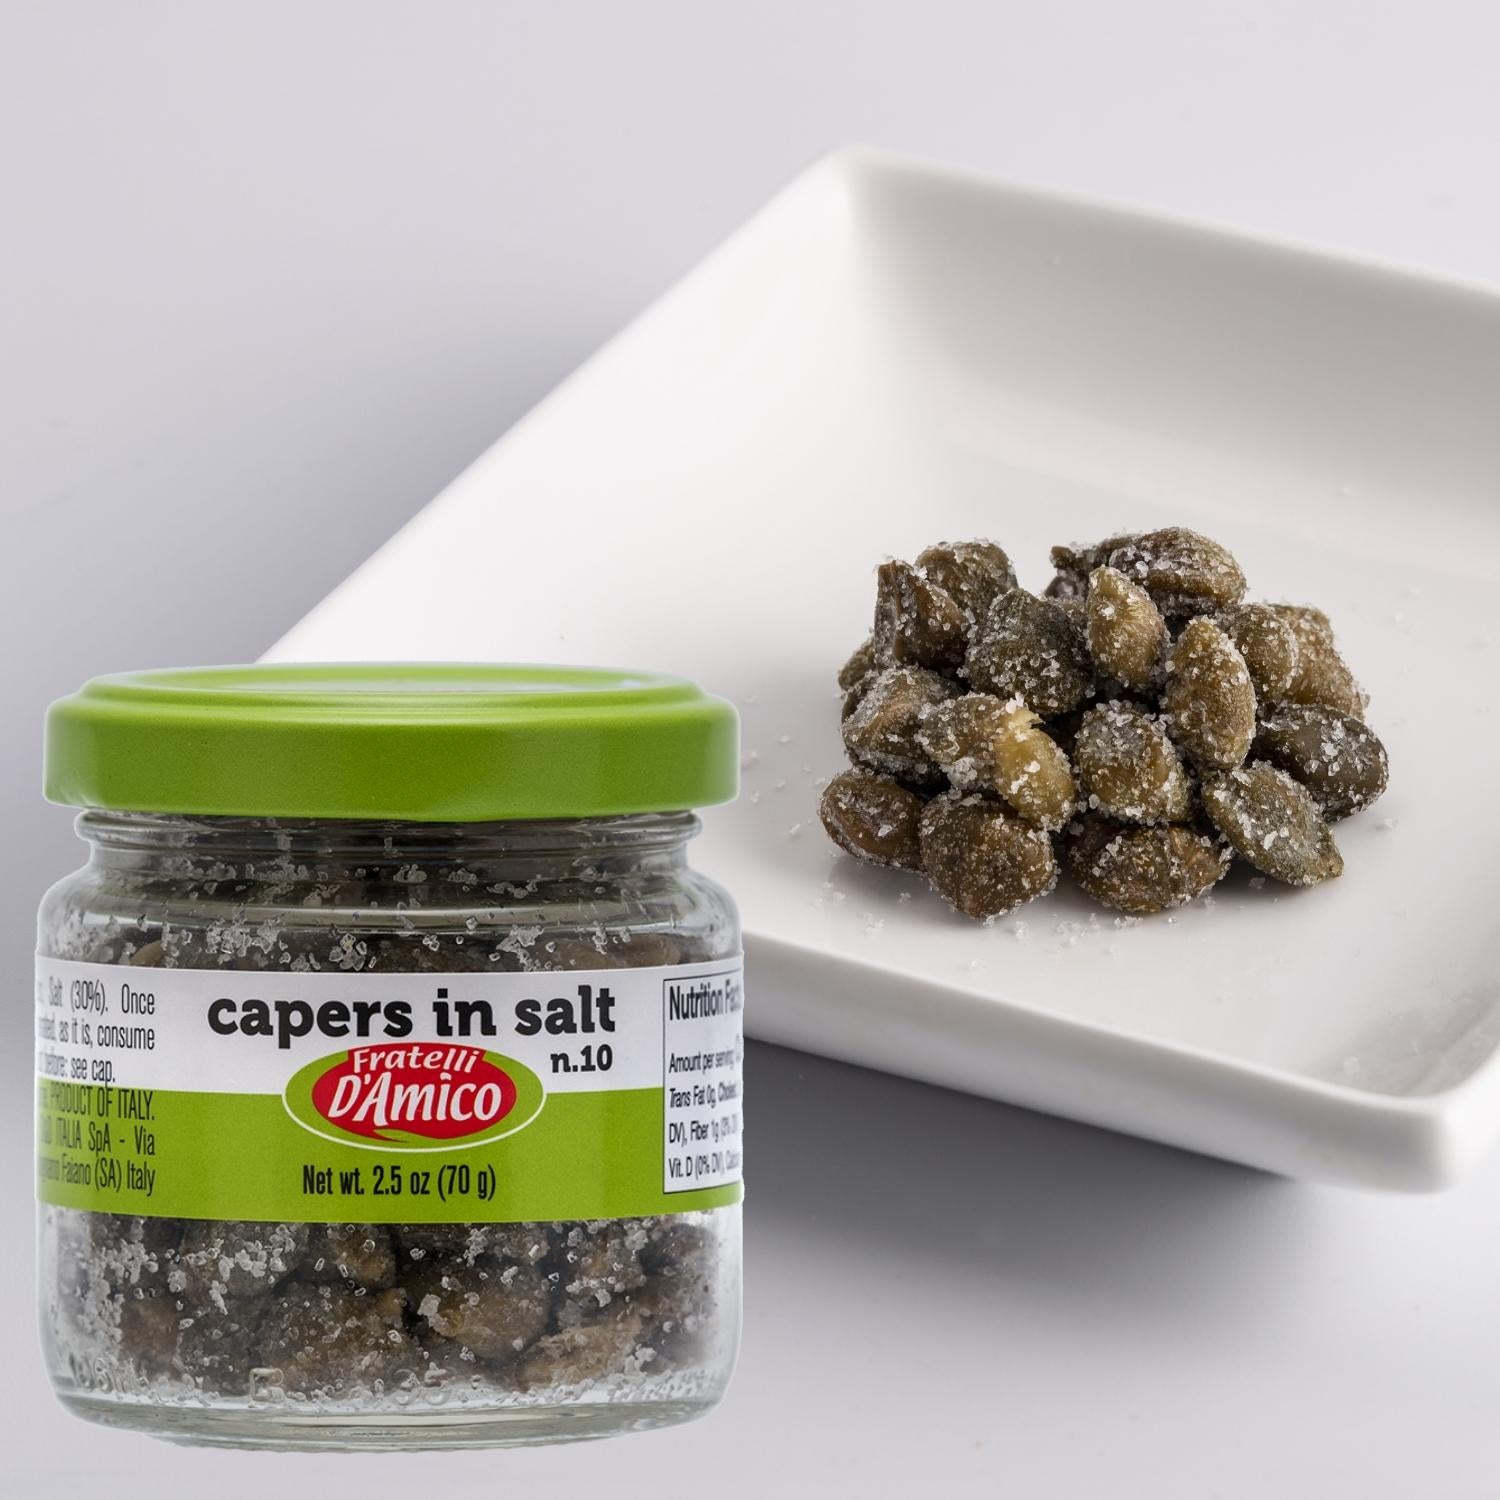 Fratelli D'Amico Capers in Salt, no, #10 2.5oz (70g)